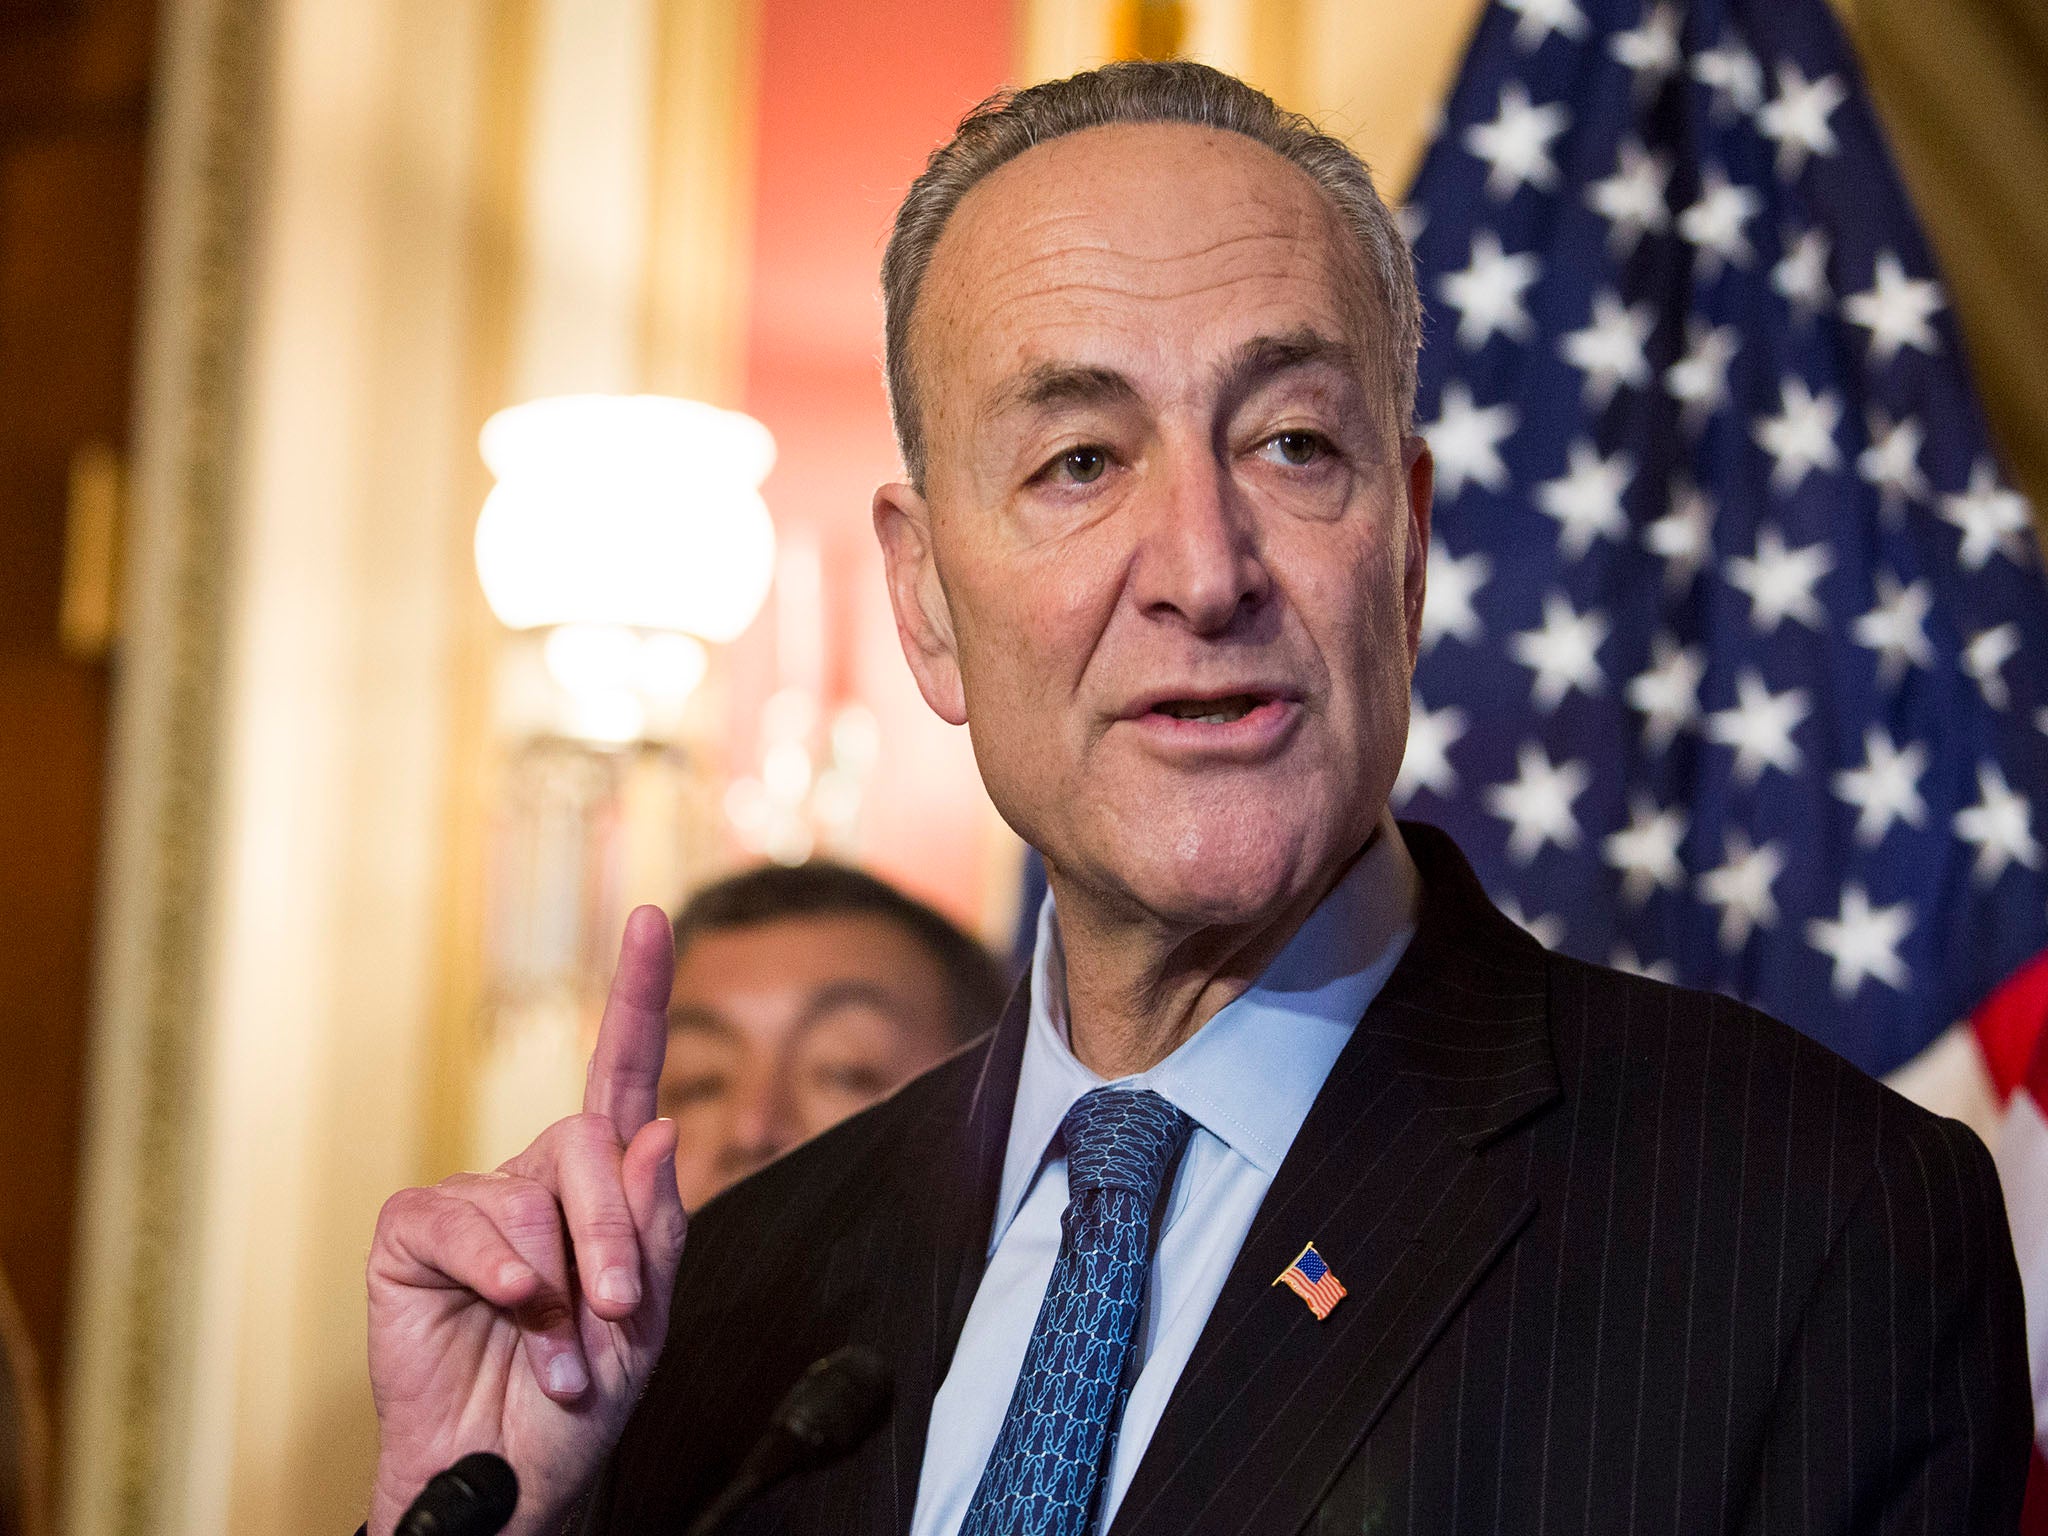 Sen. Chuck Schumer is aiming to close a legal loophole that allows people to make homemade bombs, saying it could reduce the risk of terrorist attacks.